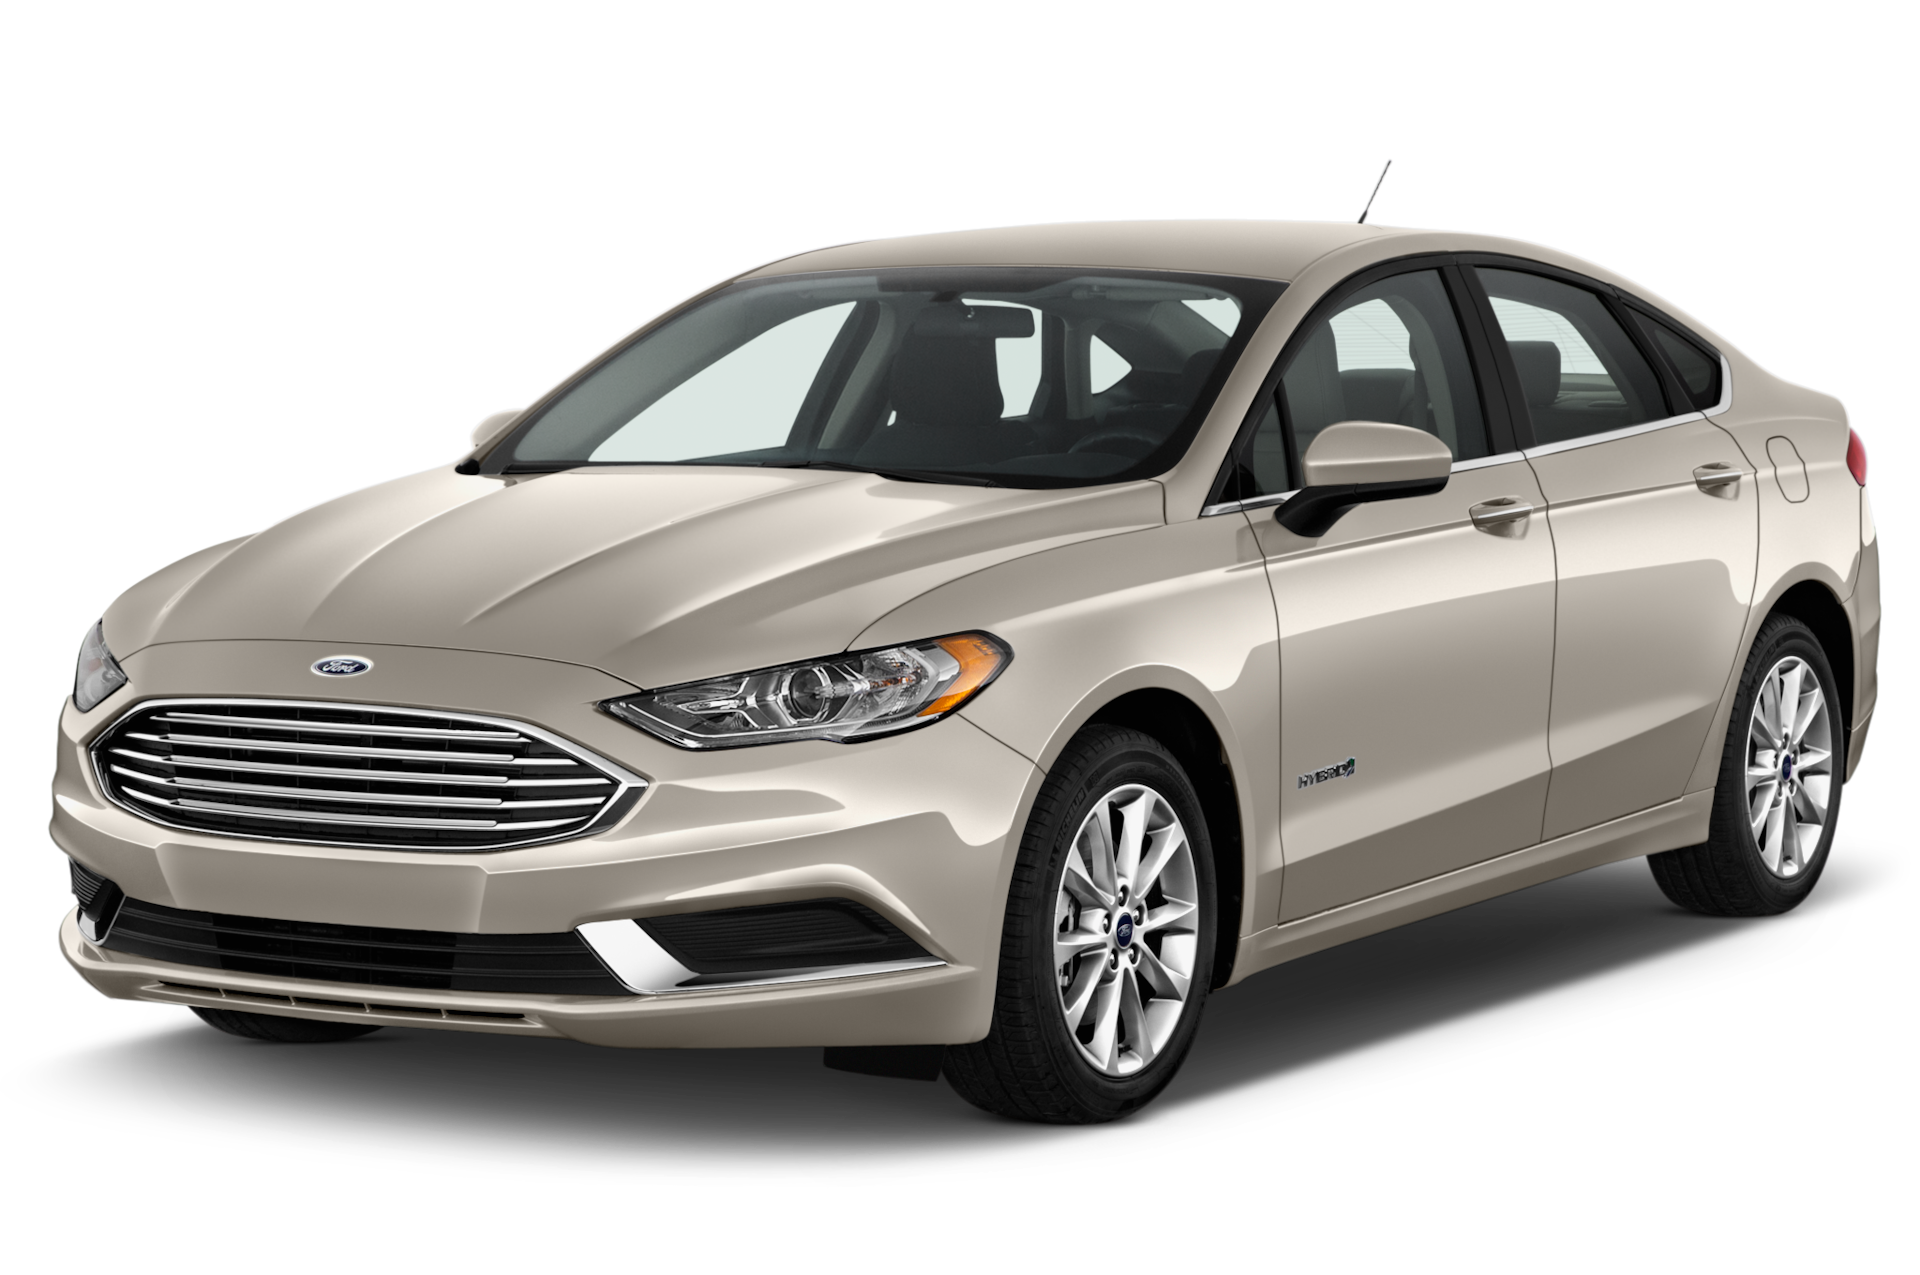 2017 Ford Fusion Hybrid Prices, Reviews, and Photos - MotorTrend